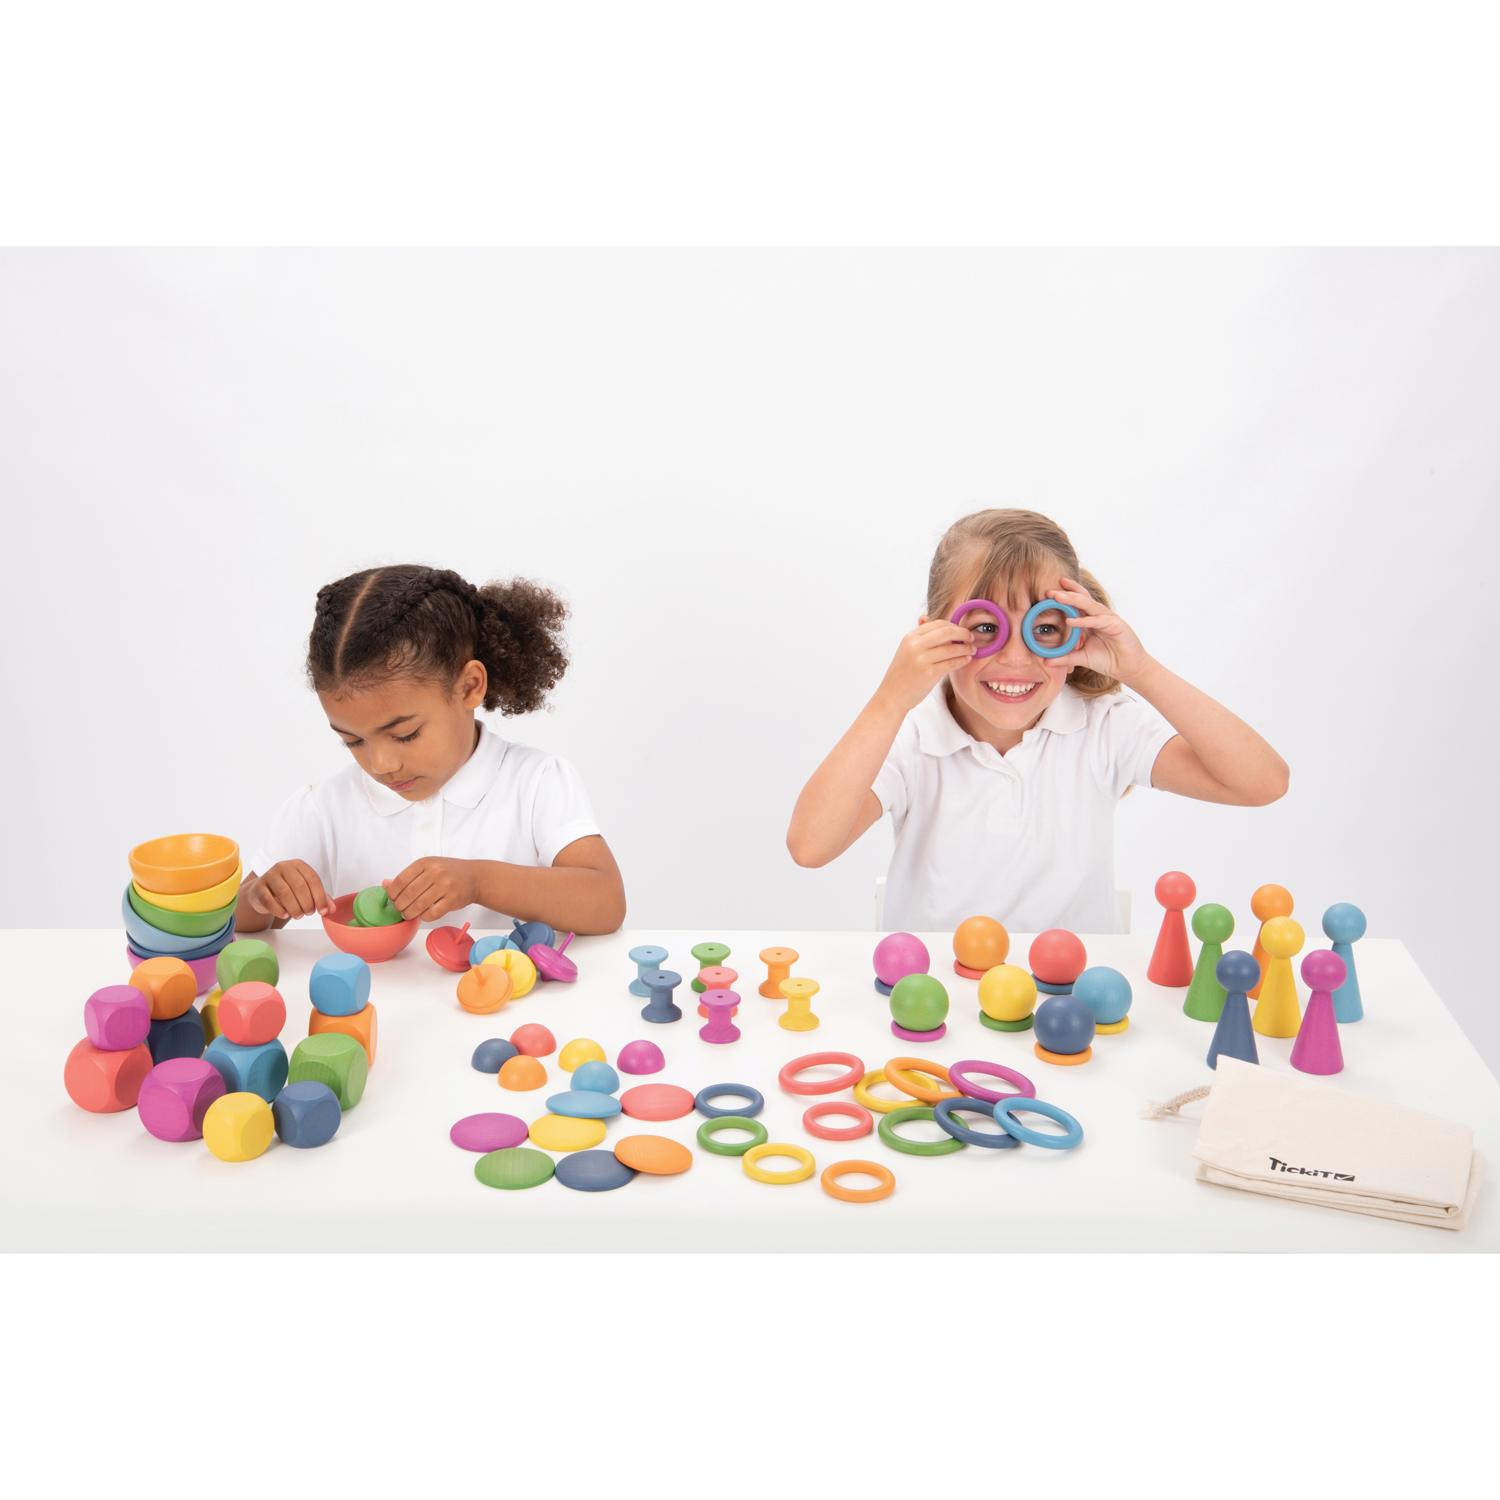 TickiT Rainbow Wooden Super Set - Set of 84 - 12 Different Shapes in 7 Colors image number null